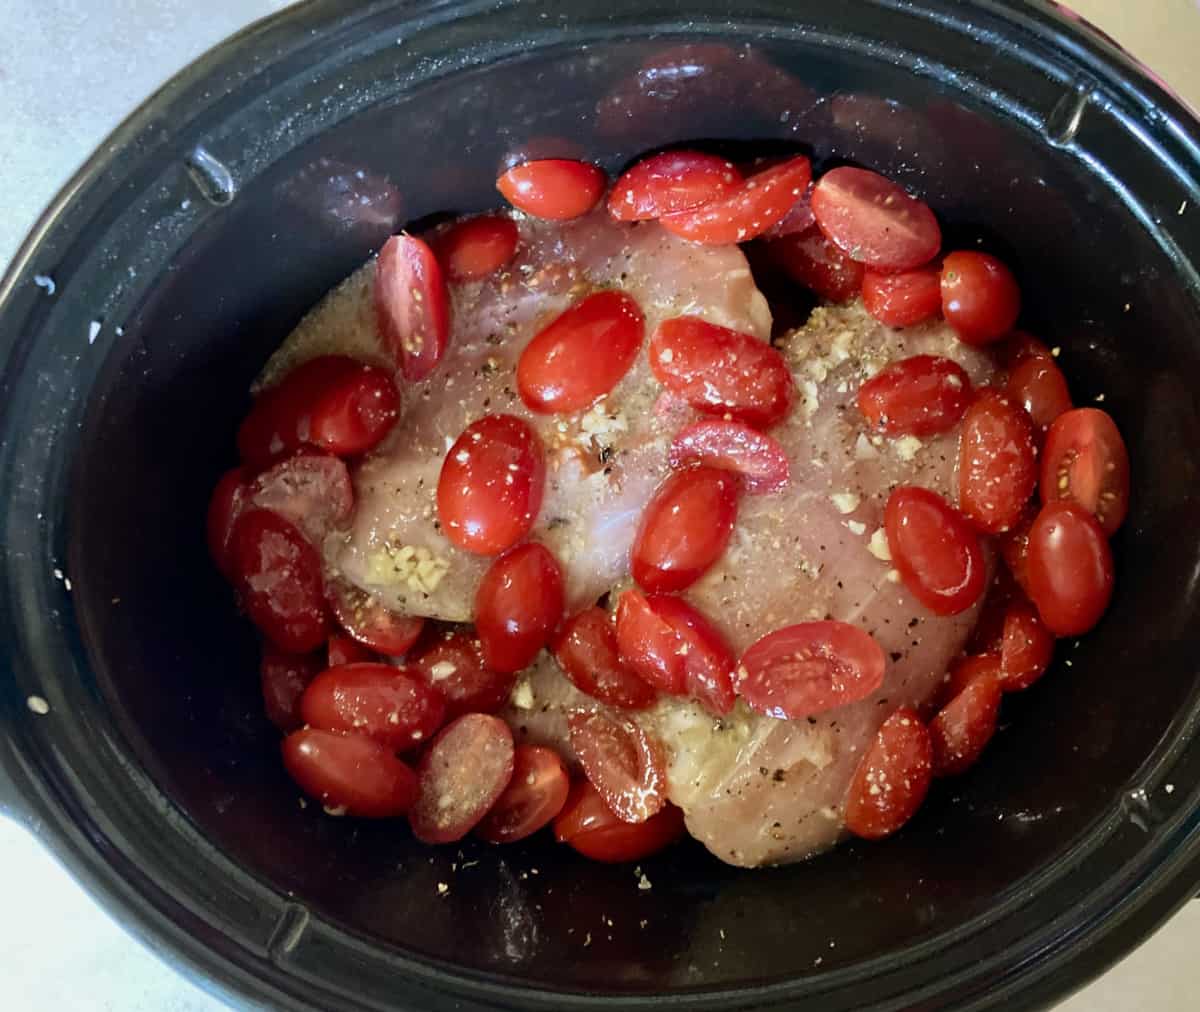 Seasoned Chicken Breasts topped with Tomatoes and Broth in Black Crock Pot